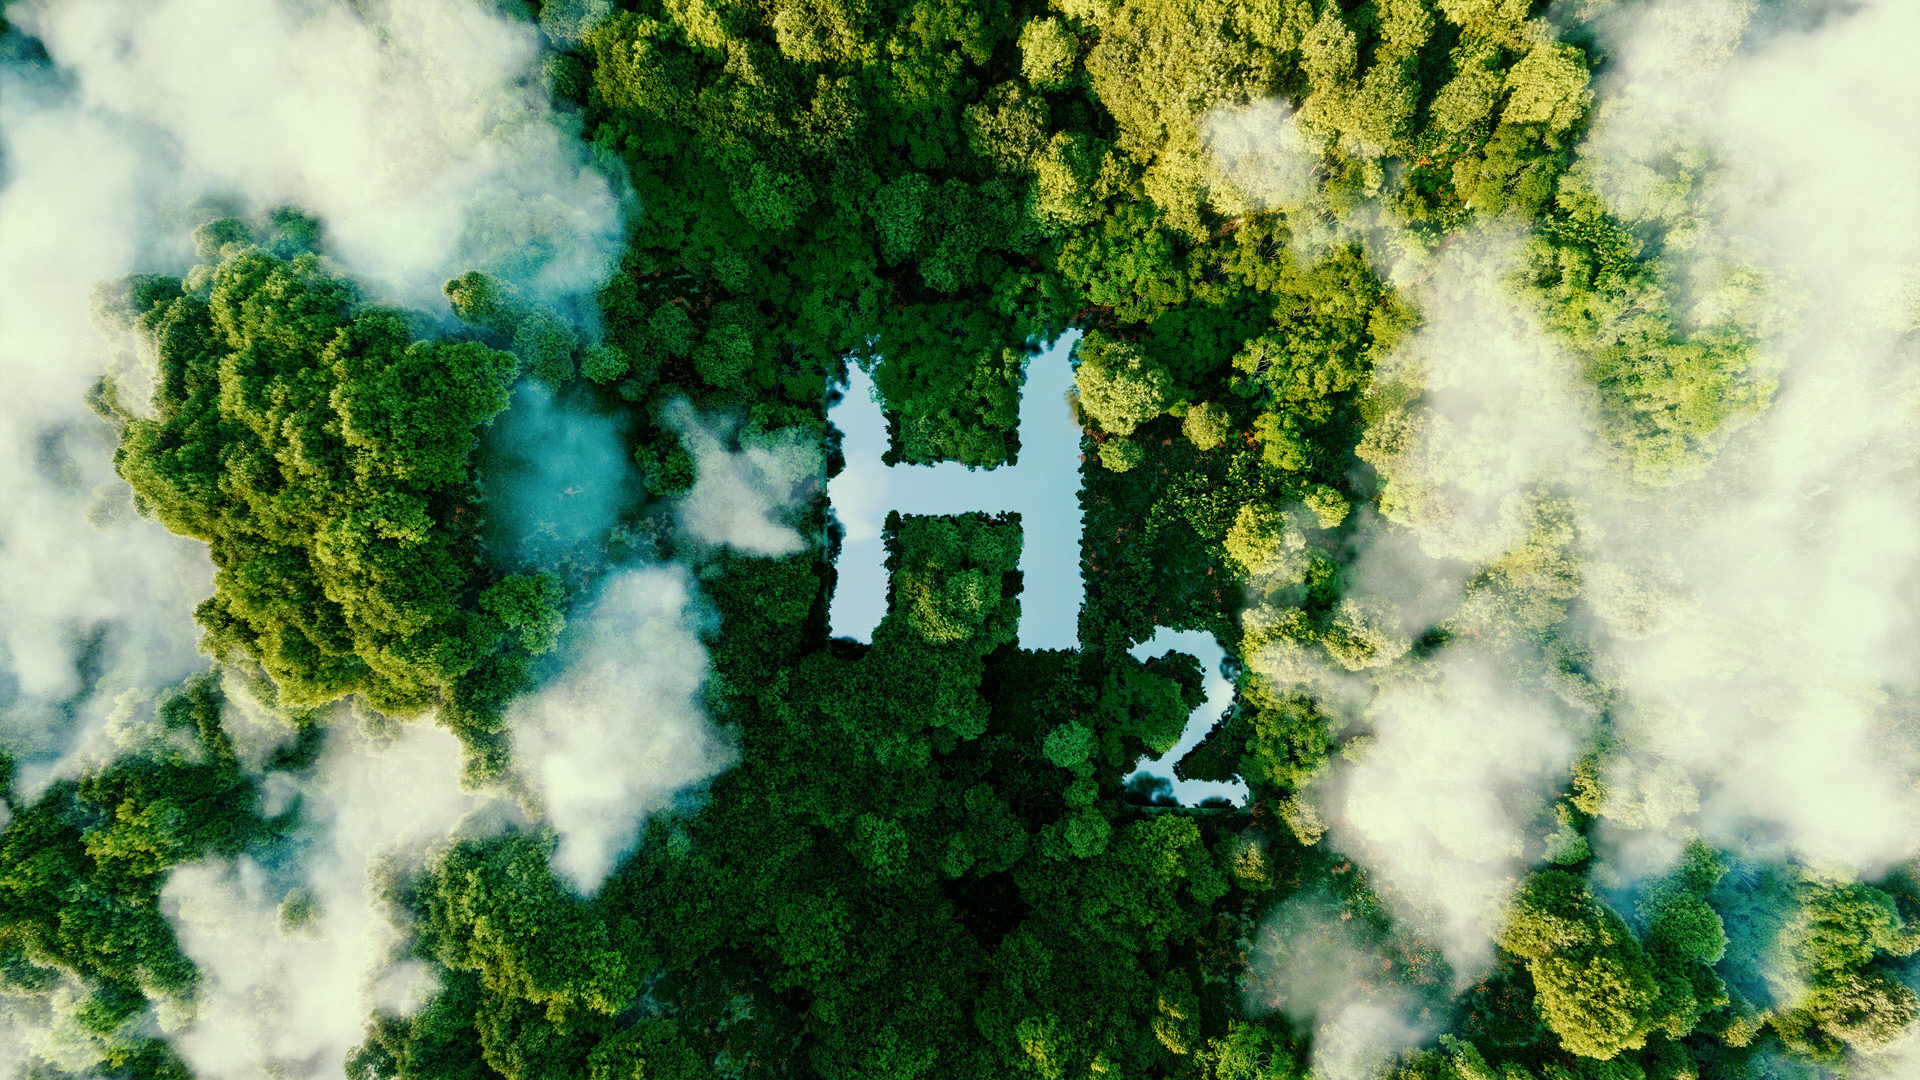 "h2" formed out of water surrounded by trees and clouds